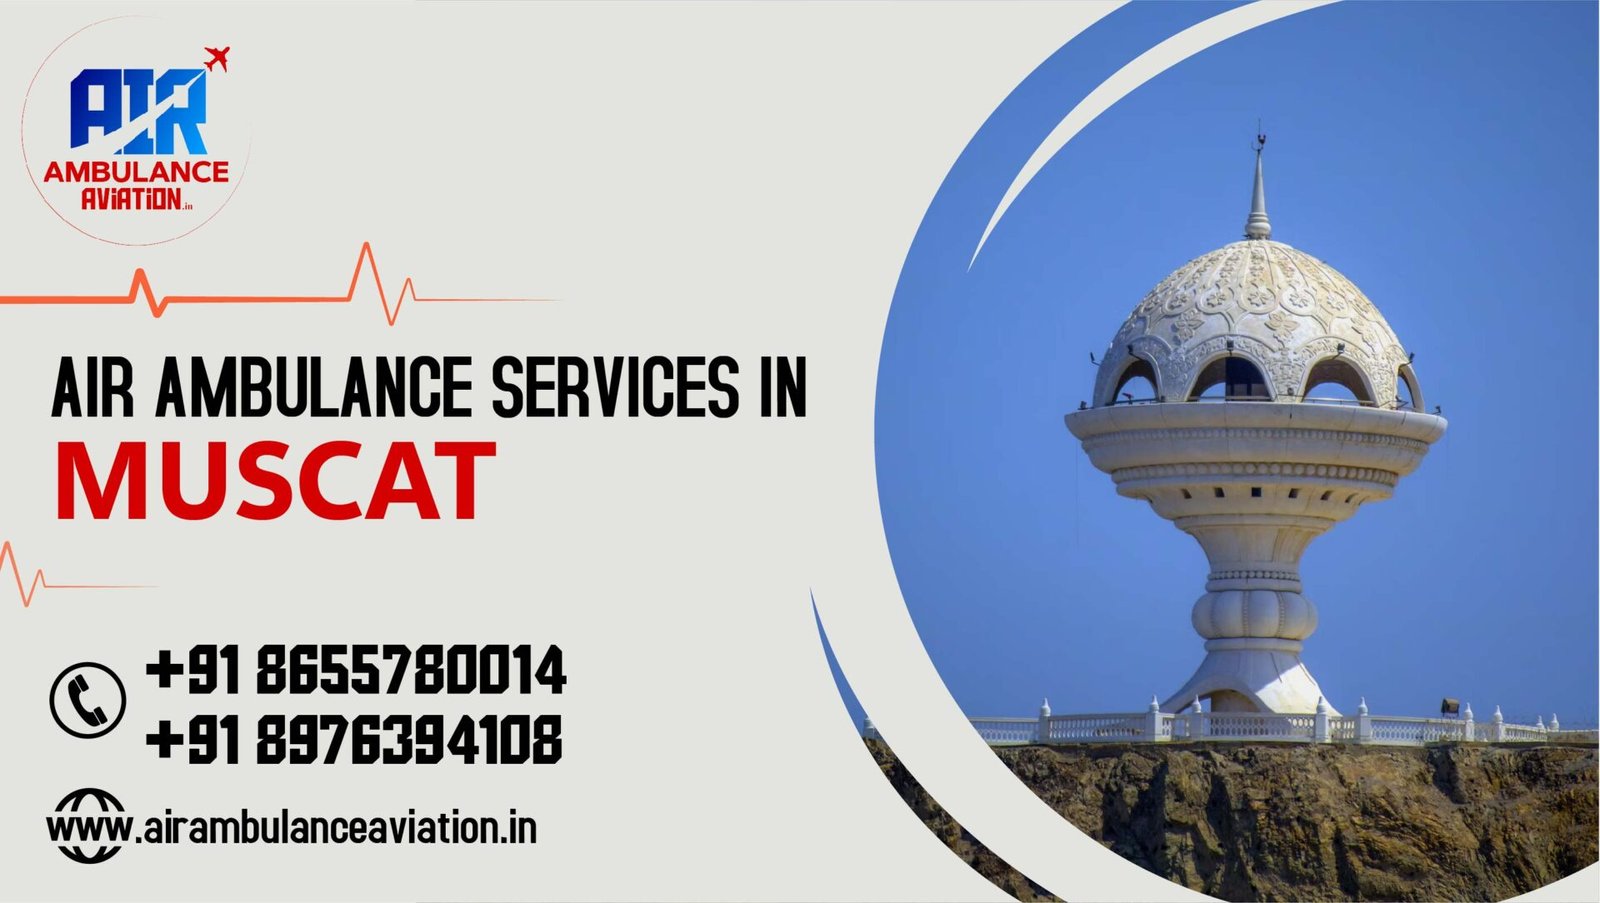 Air Ambulance Services in Muscat